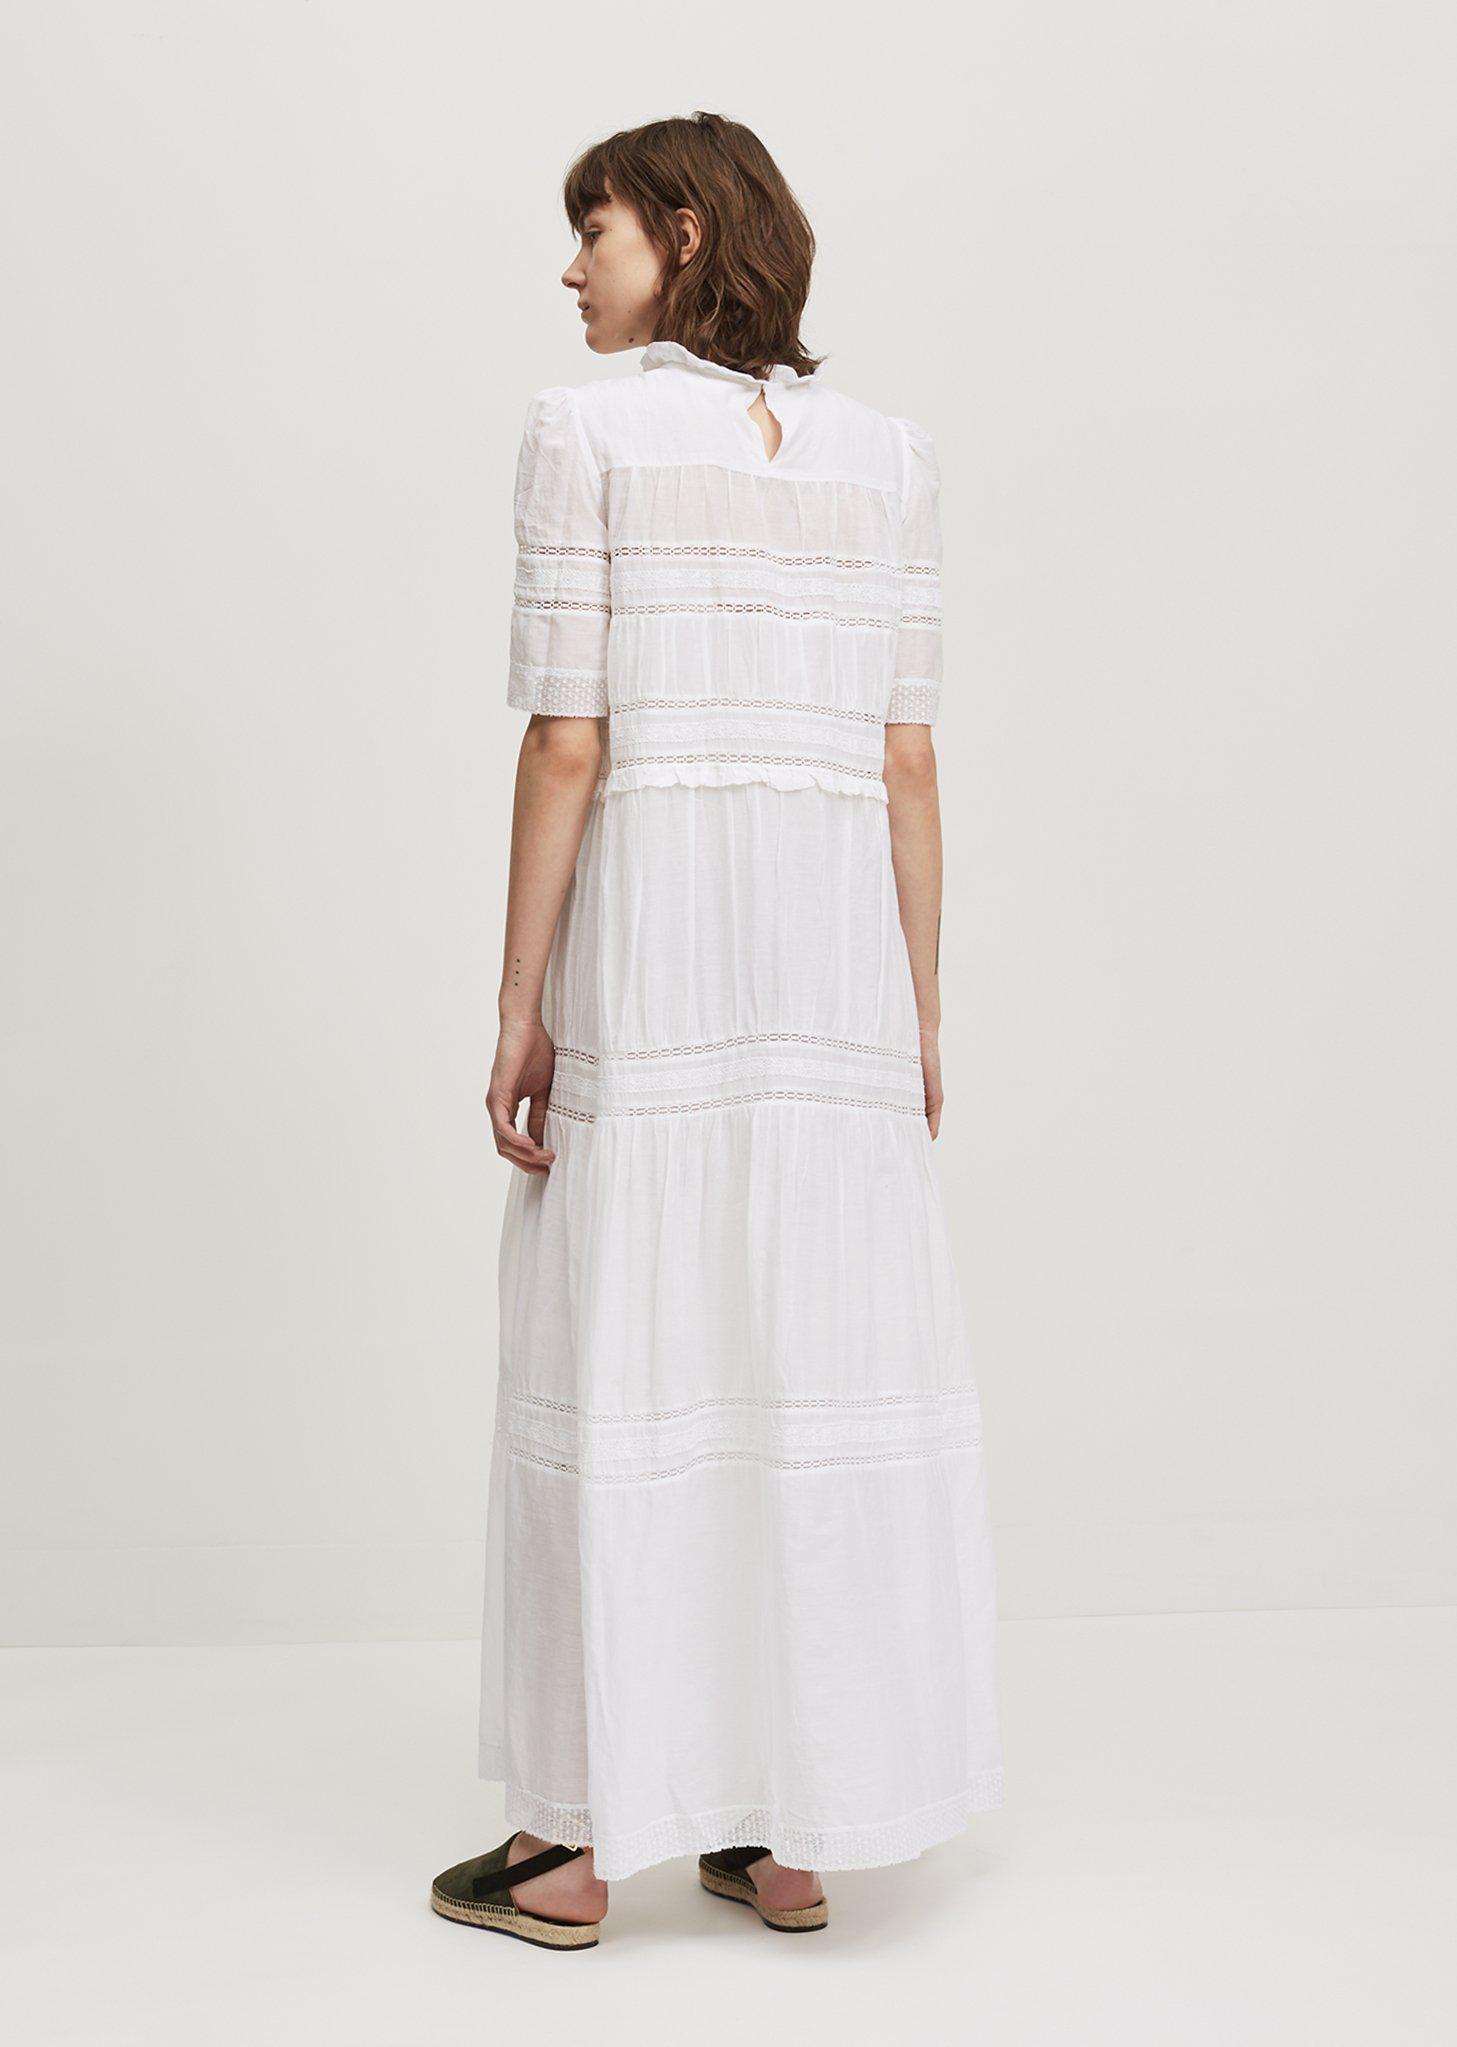 Étoile Isabel Marant Vealy Lace Cotton Dress in White - Lyst